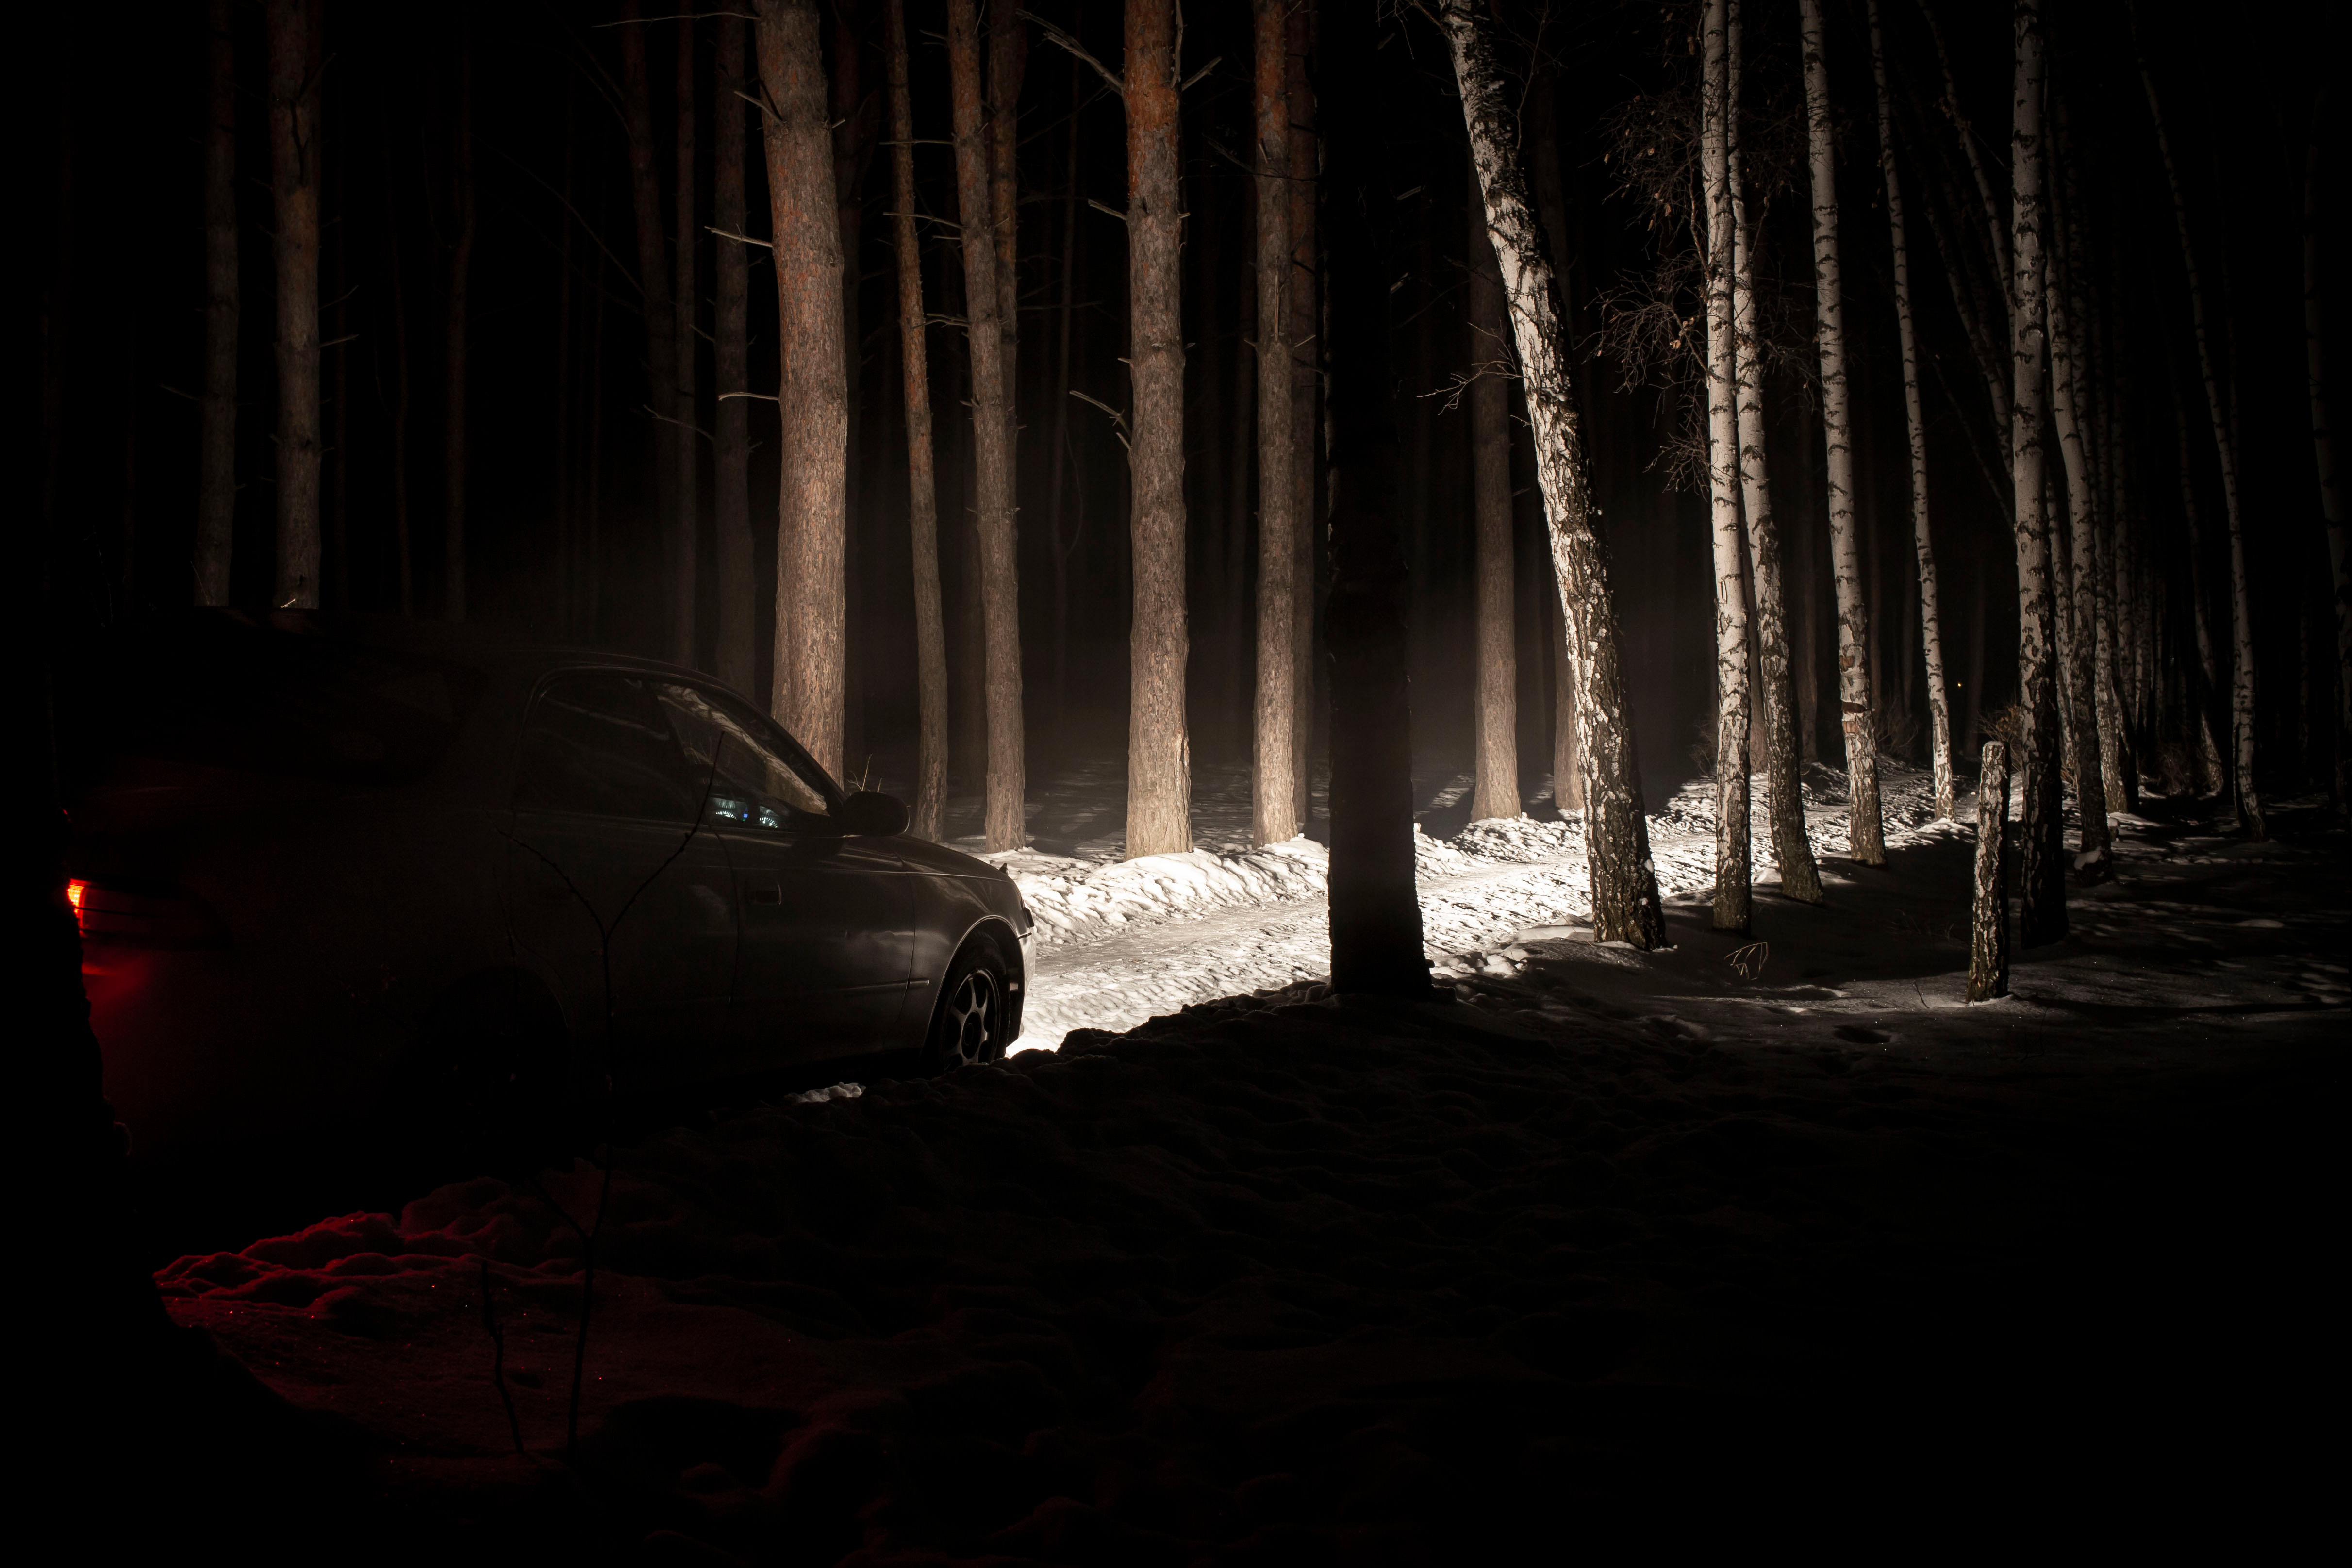 Car in forest at night. | Source: Shutterstock